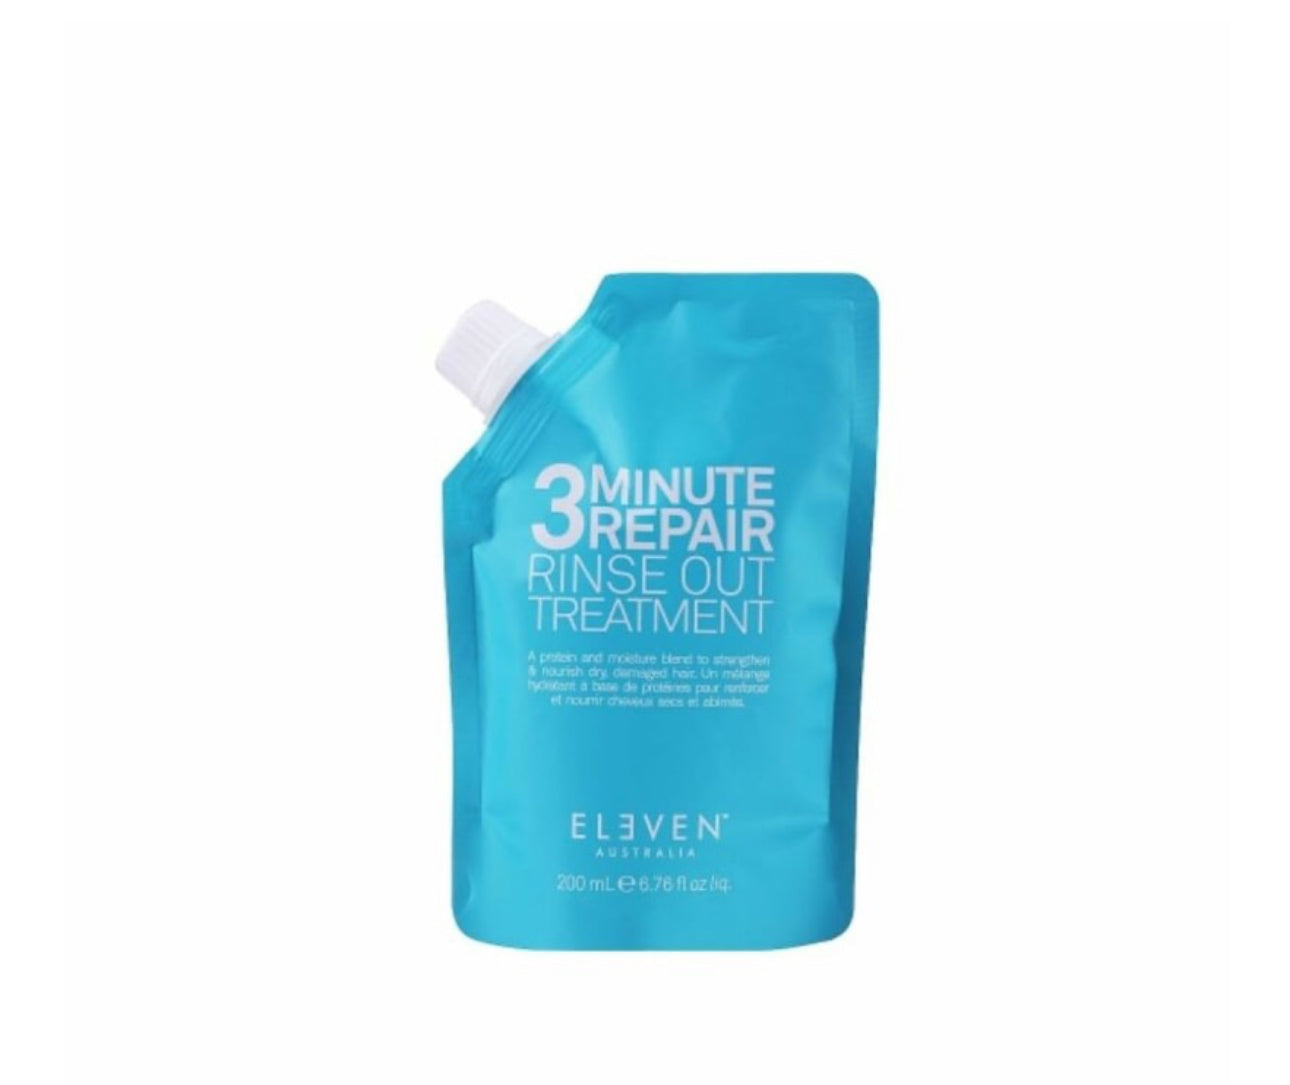 Eleven Australia 3 minute repair rince out treatment